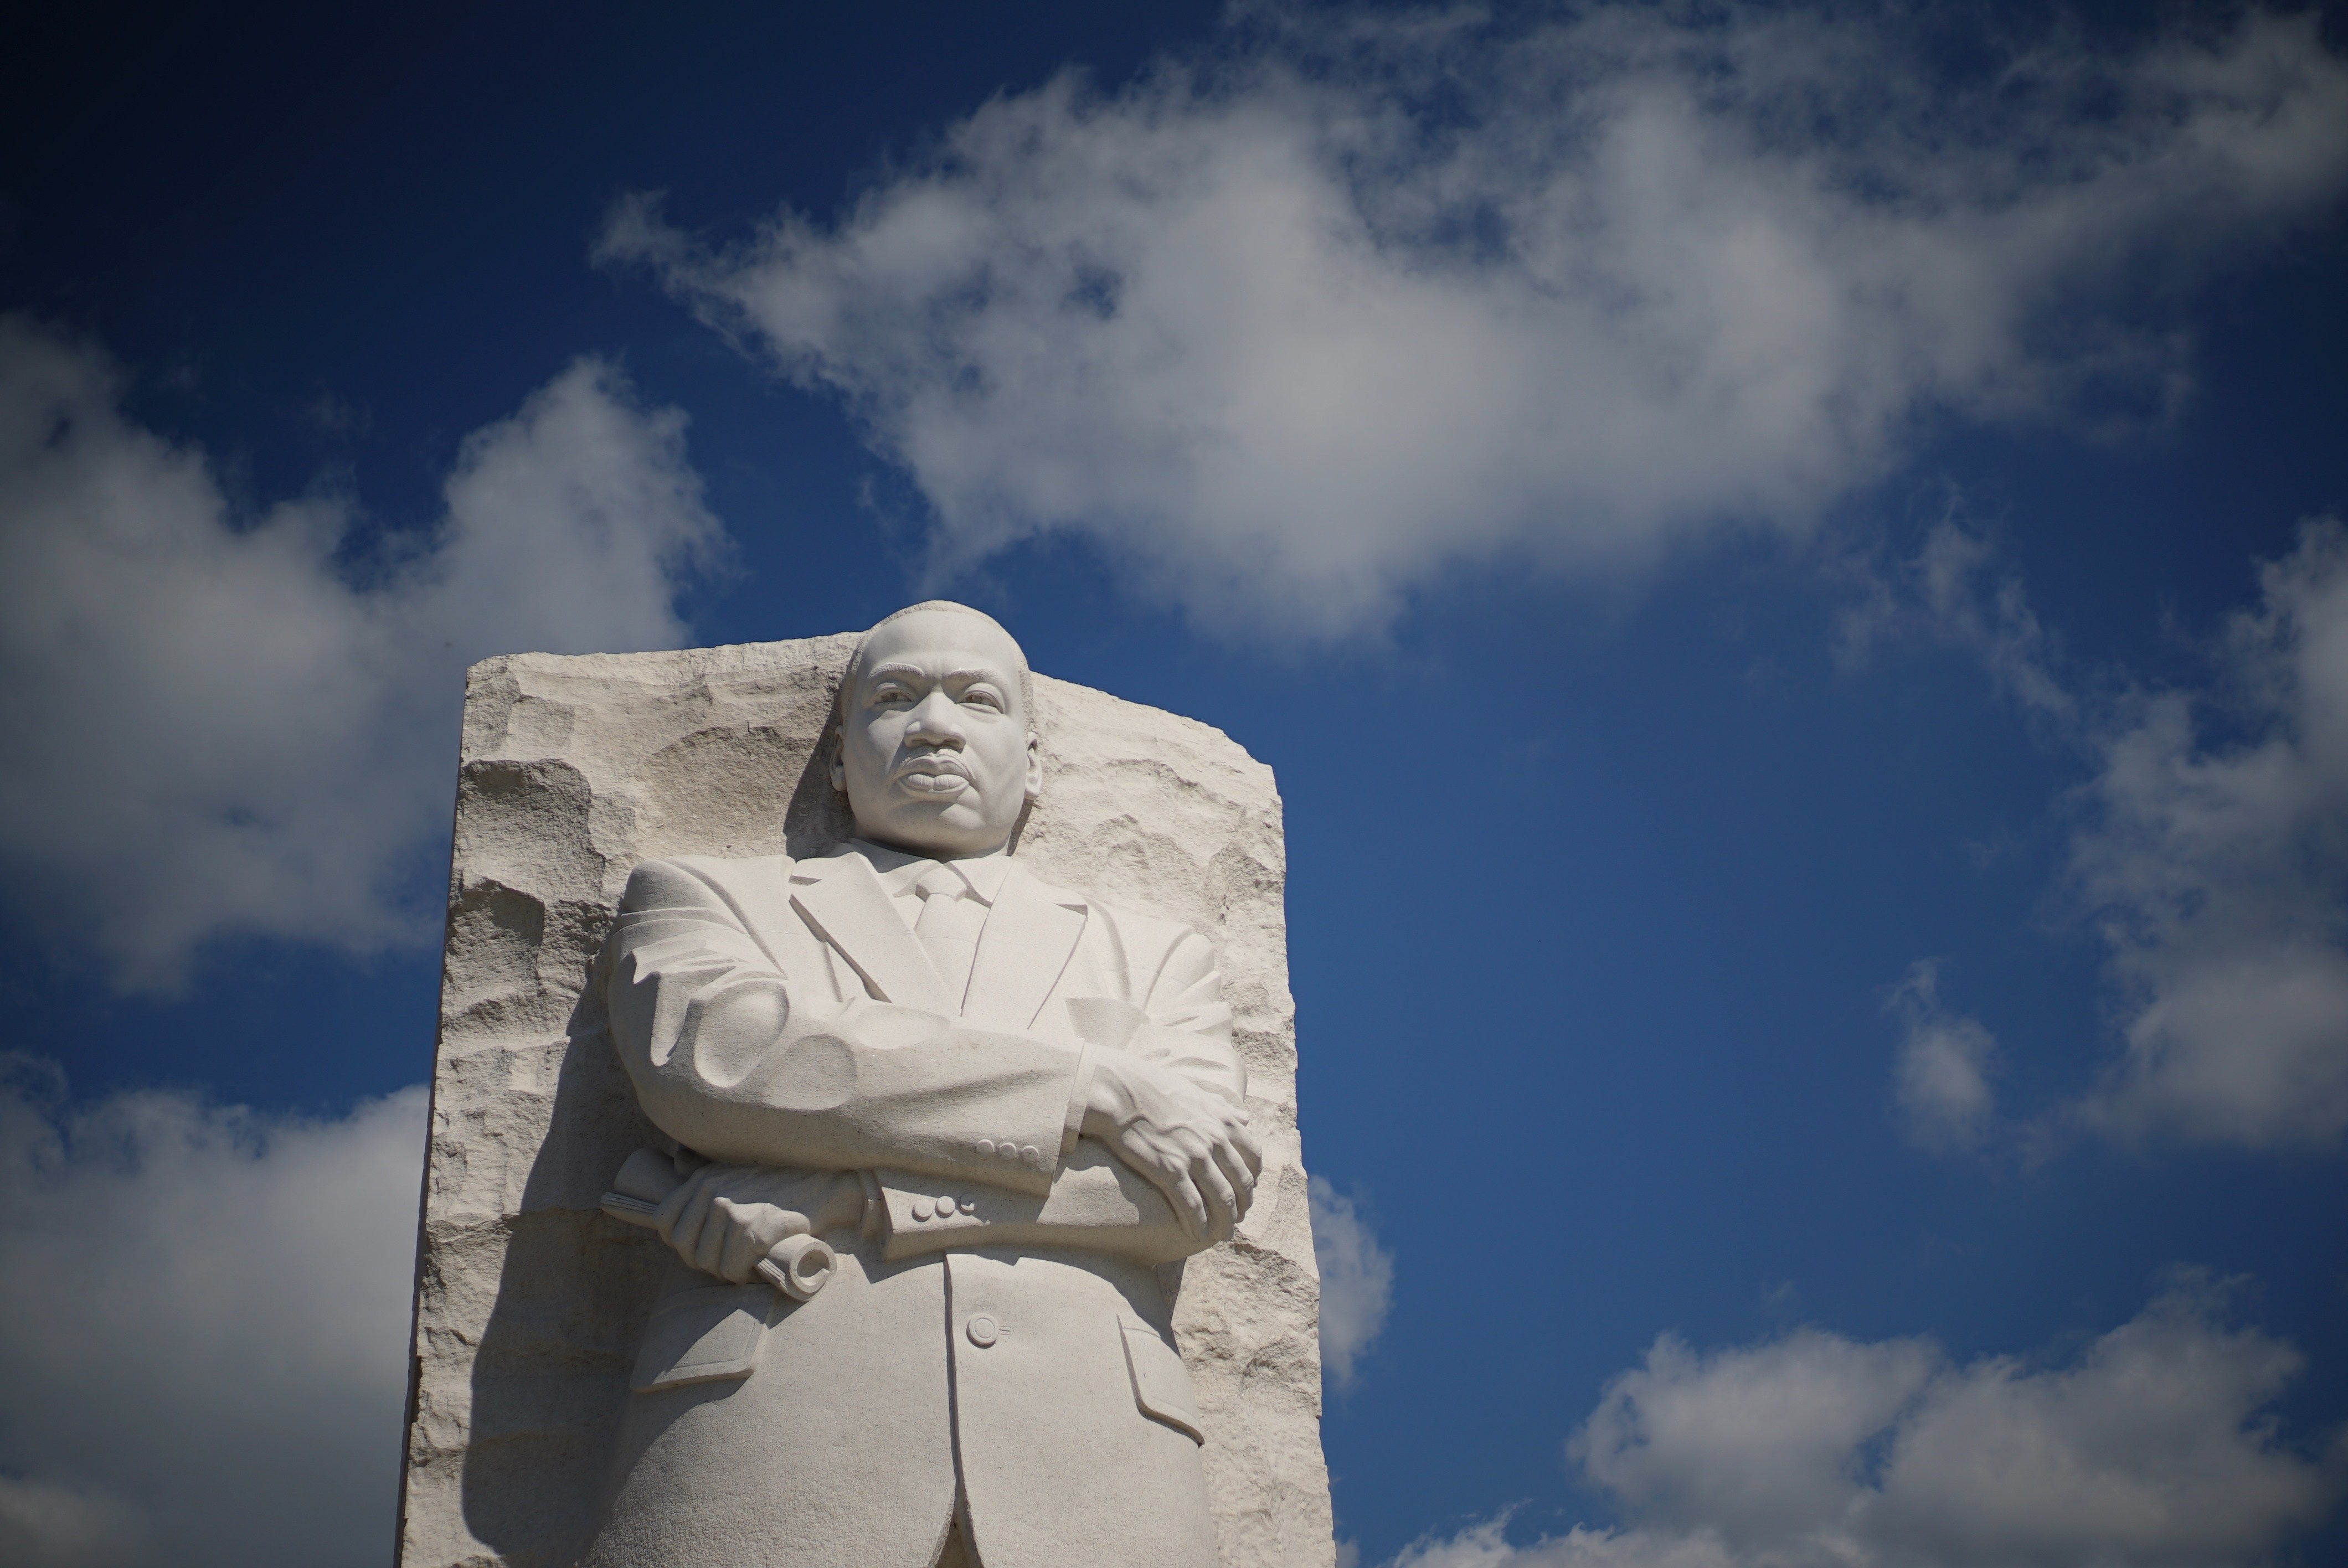 Where Do We Go From Here? Activists, Church Leaders And Writers Reflect On MLK’s Legacy